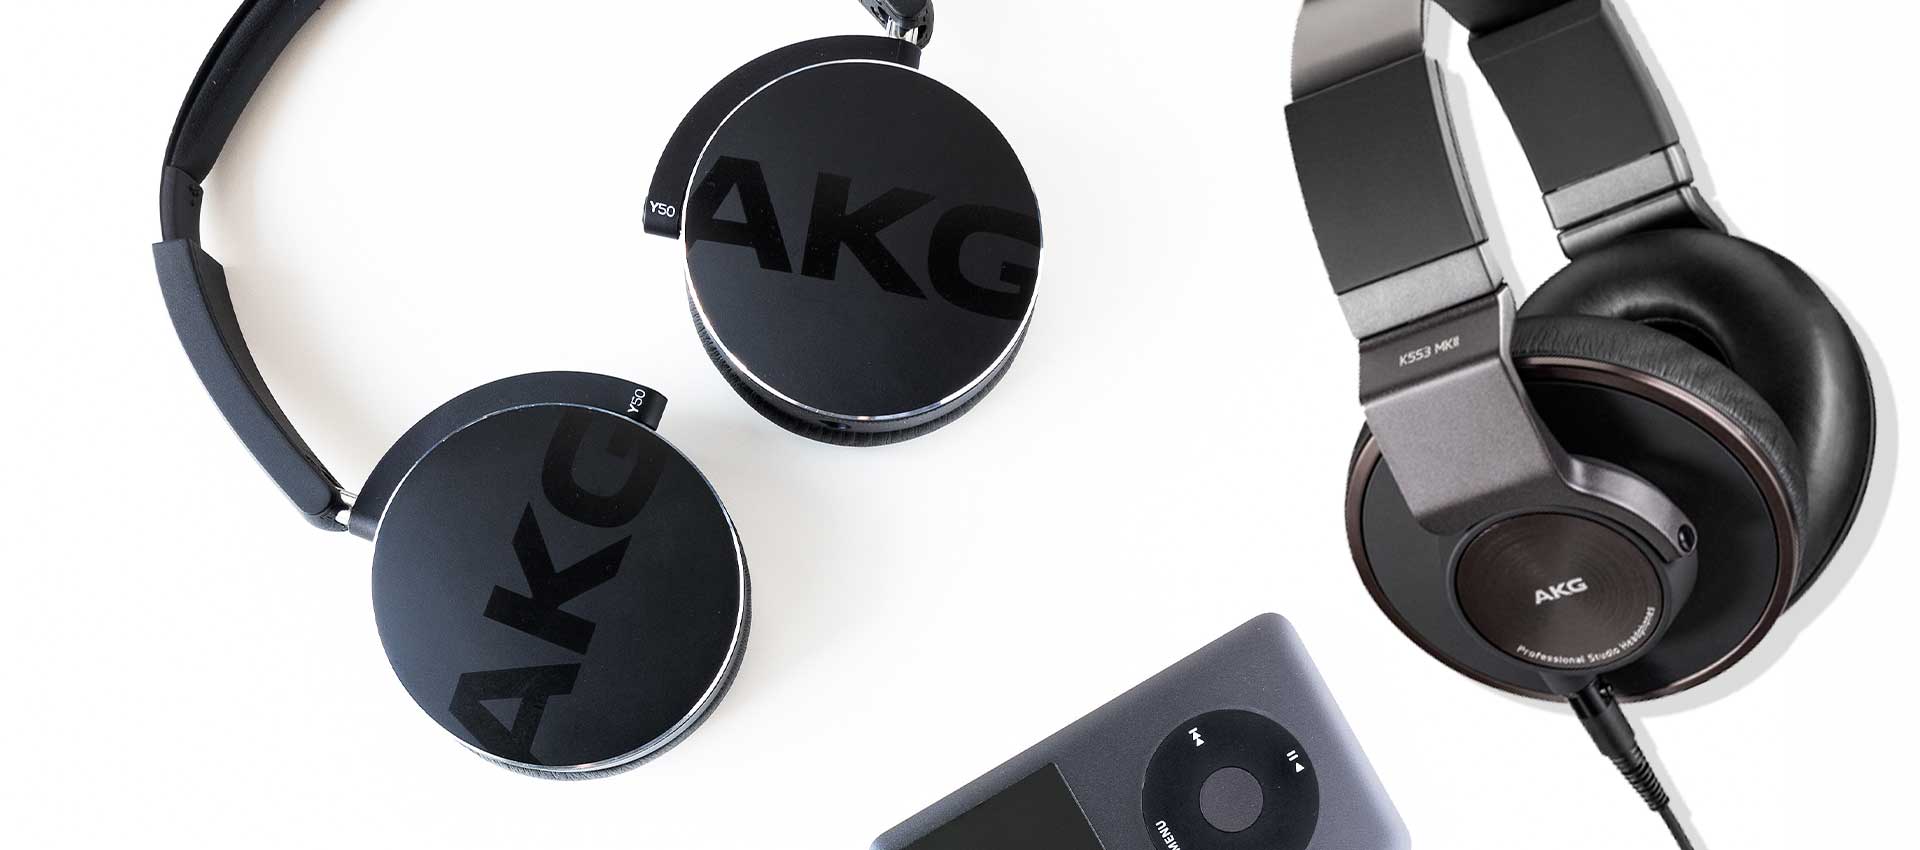 Latest AKG Headphones And Earphones Products Of 2020 In Pakistan